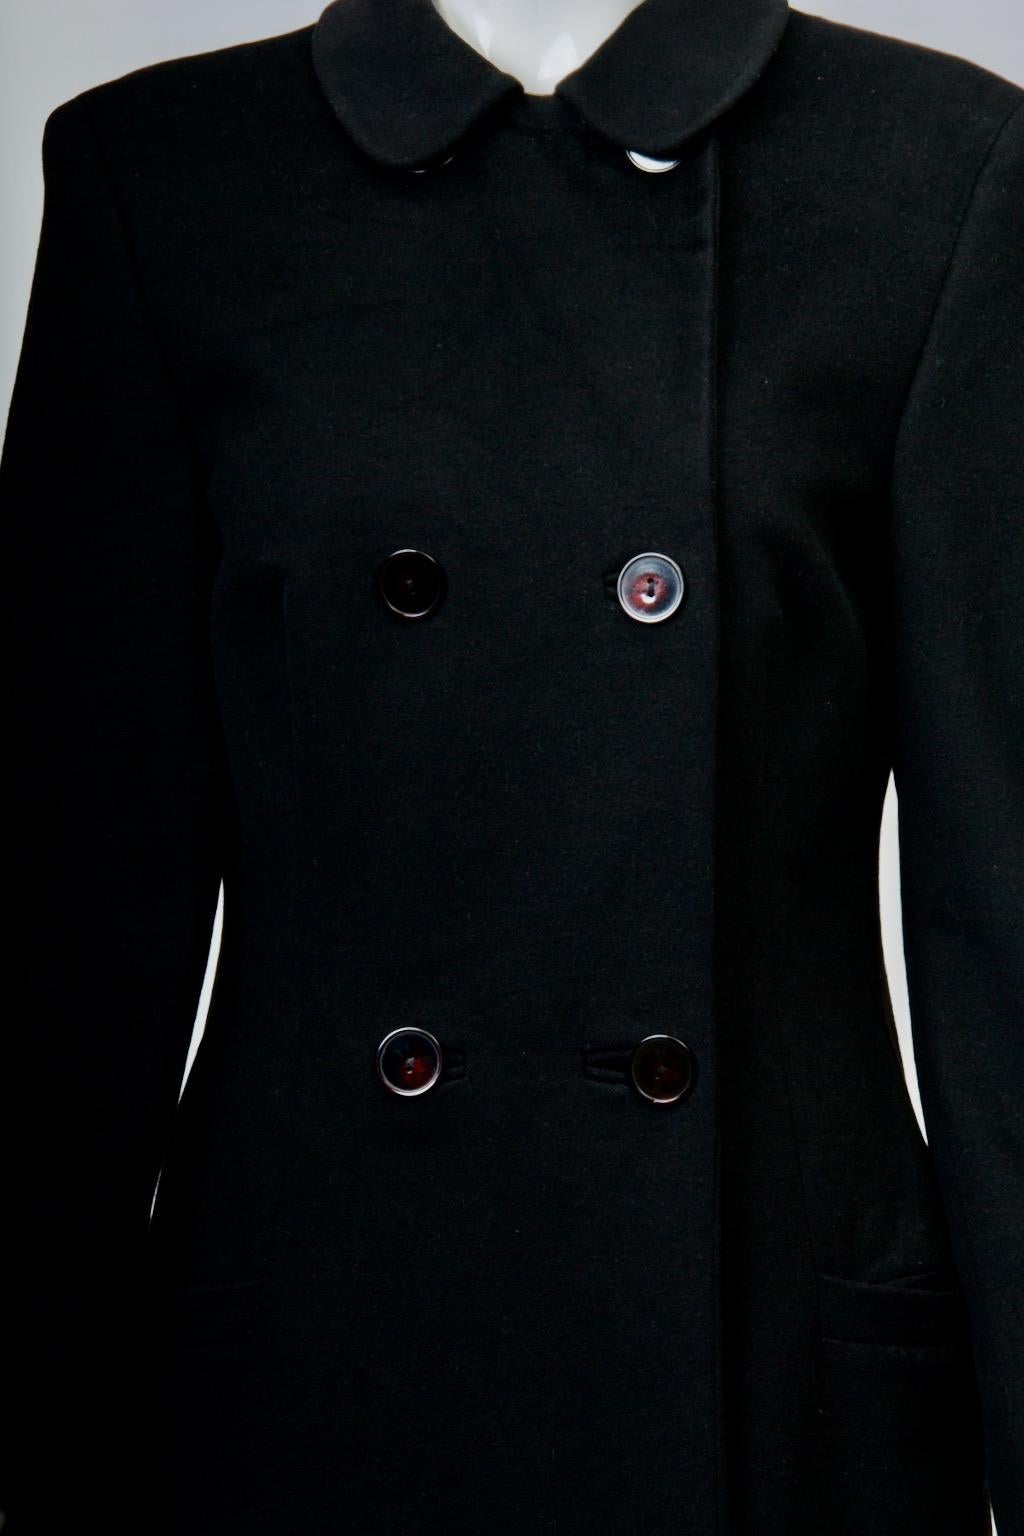 c.1990s Gianni Versace coat in soft 15% cashmere/wool blend, featuring a true double-breasted style that buttons up to a small round collar. The body of the coat has seams towards the front and back sides as well as darts in front that shape it to